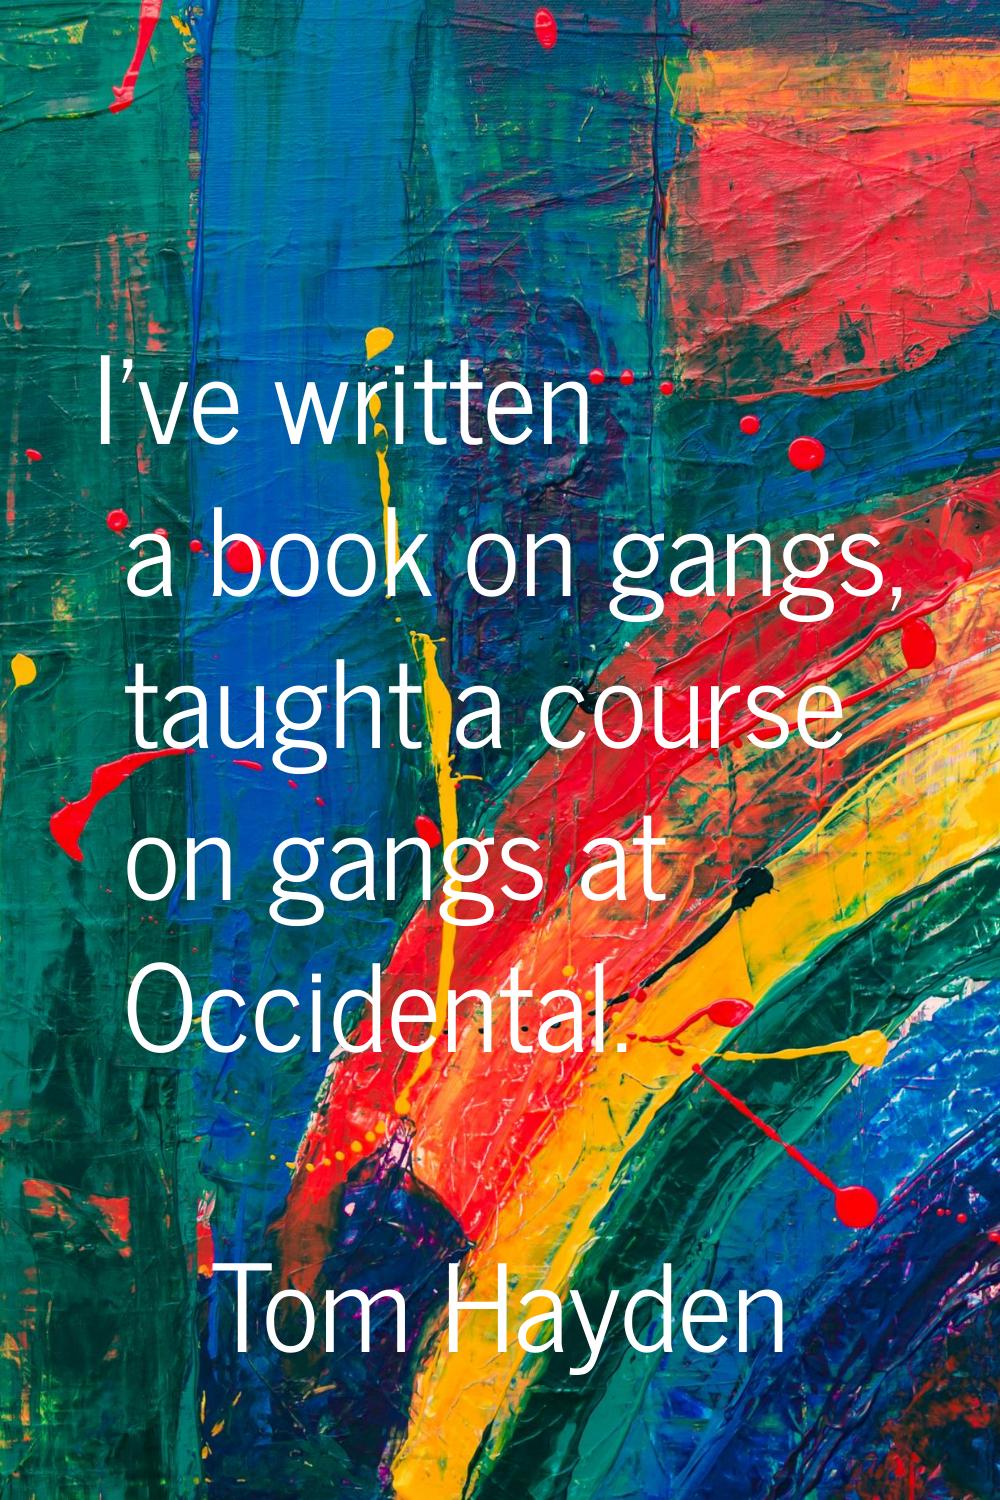 I've written a book on gangs, taught a course on gangs at Occidental.